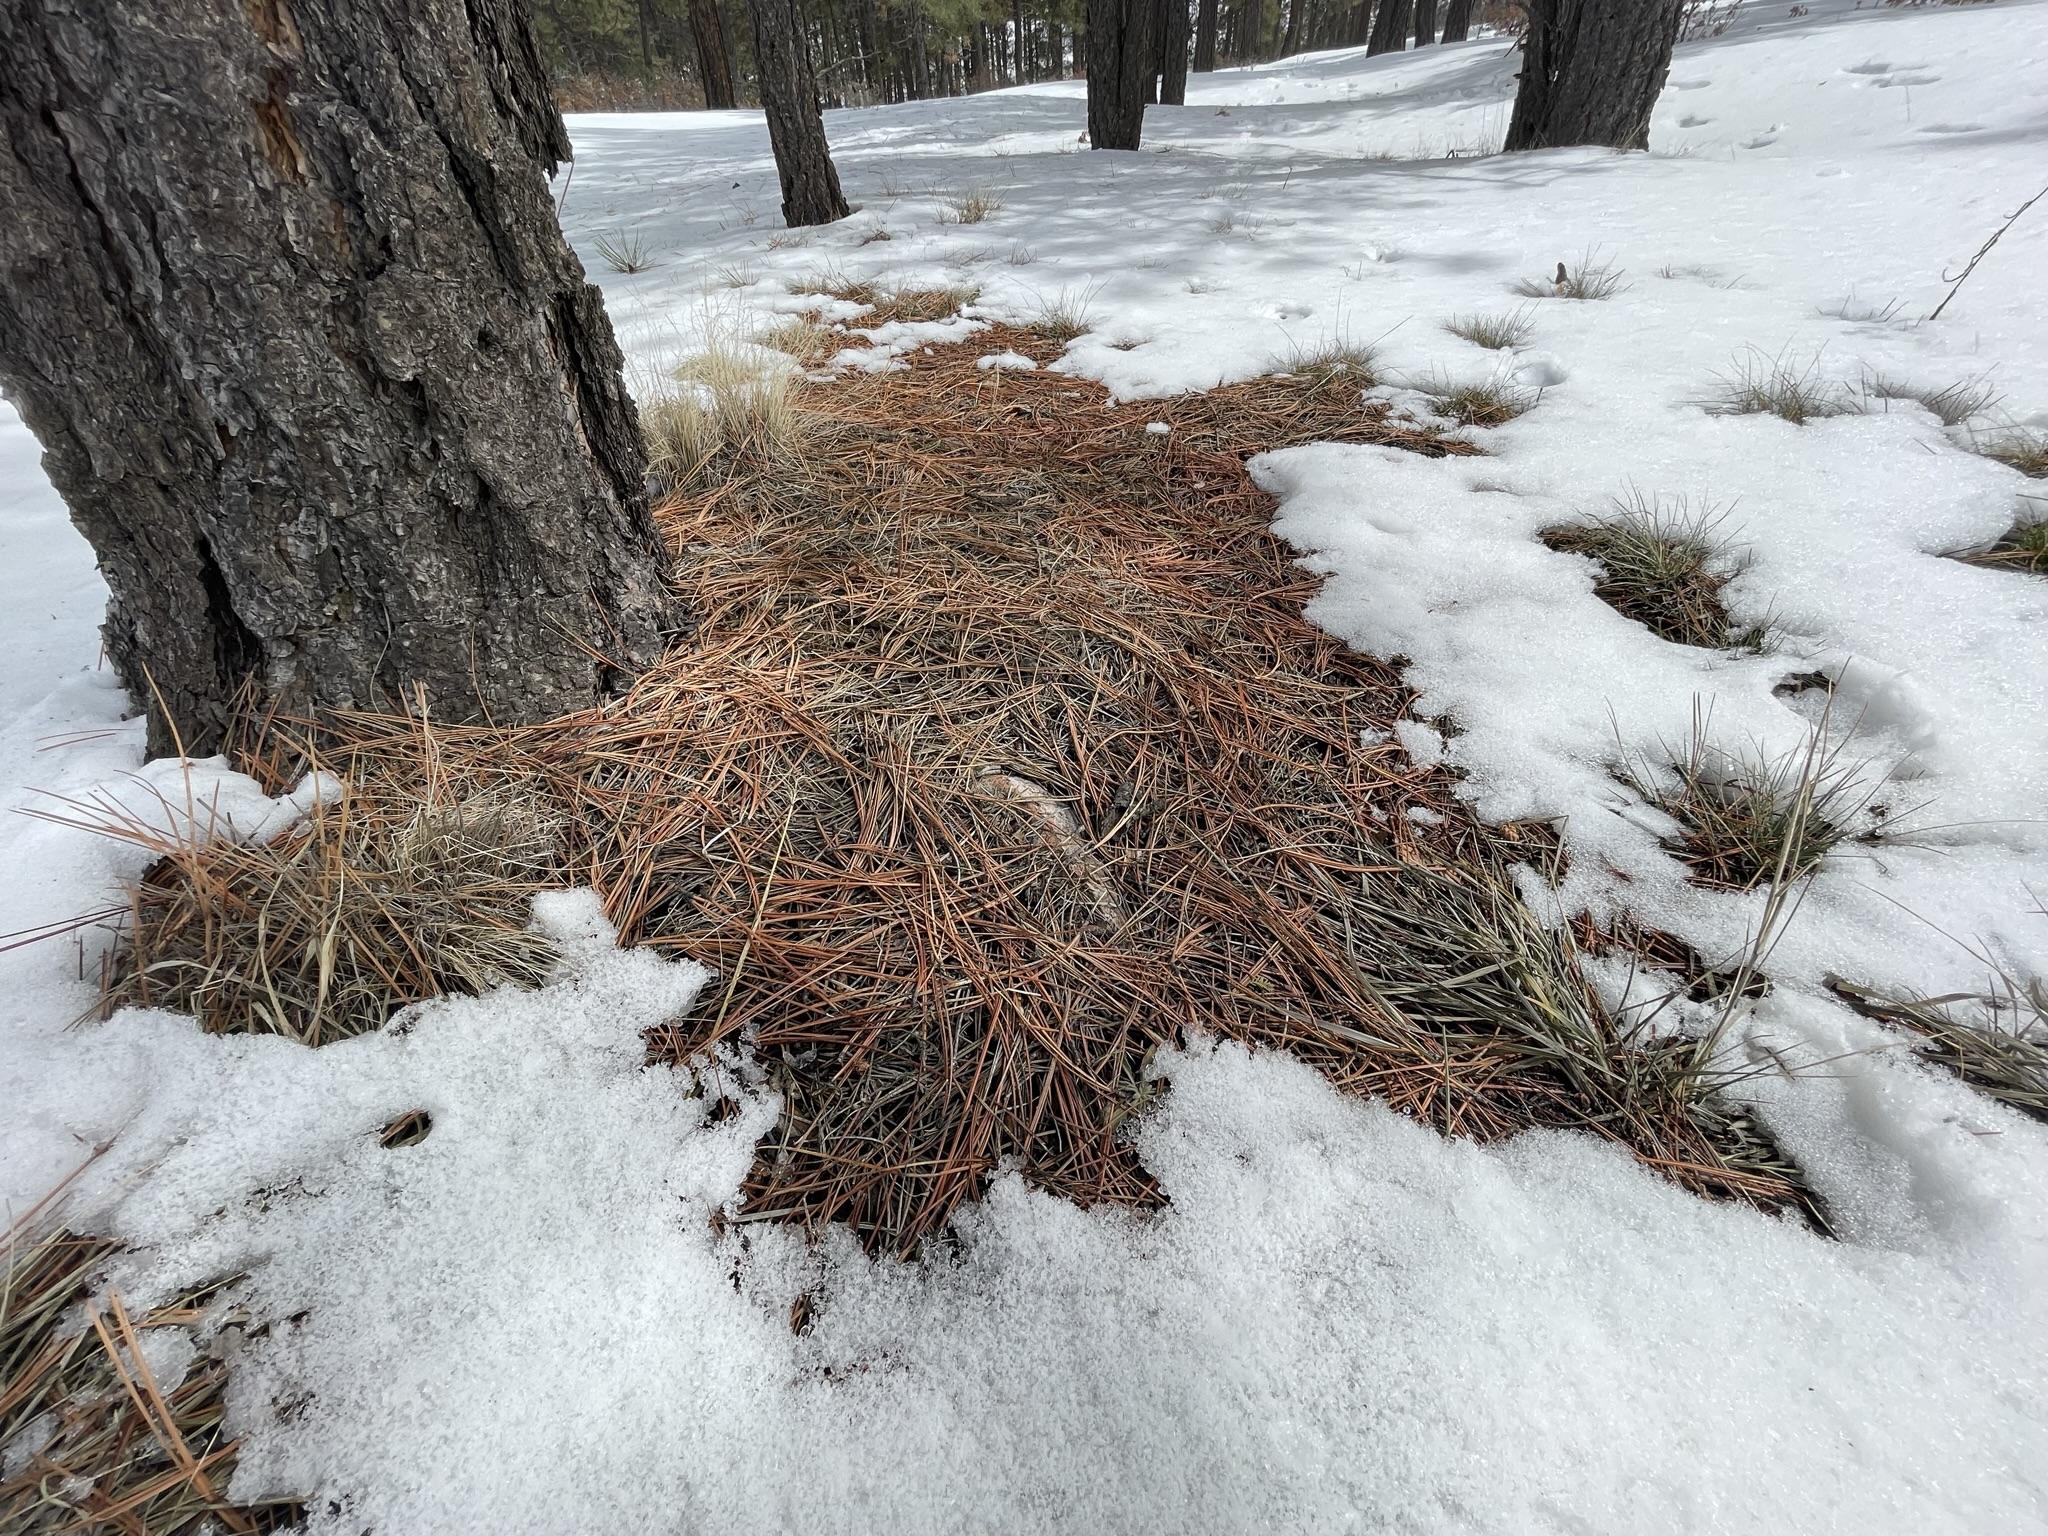 Snow near tree surrounded by pine needles